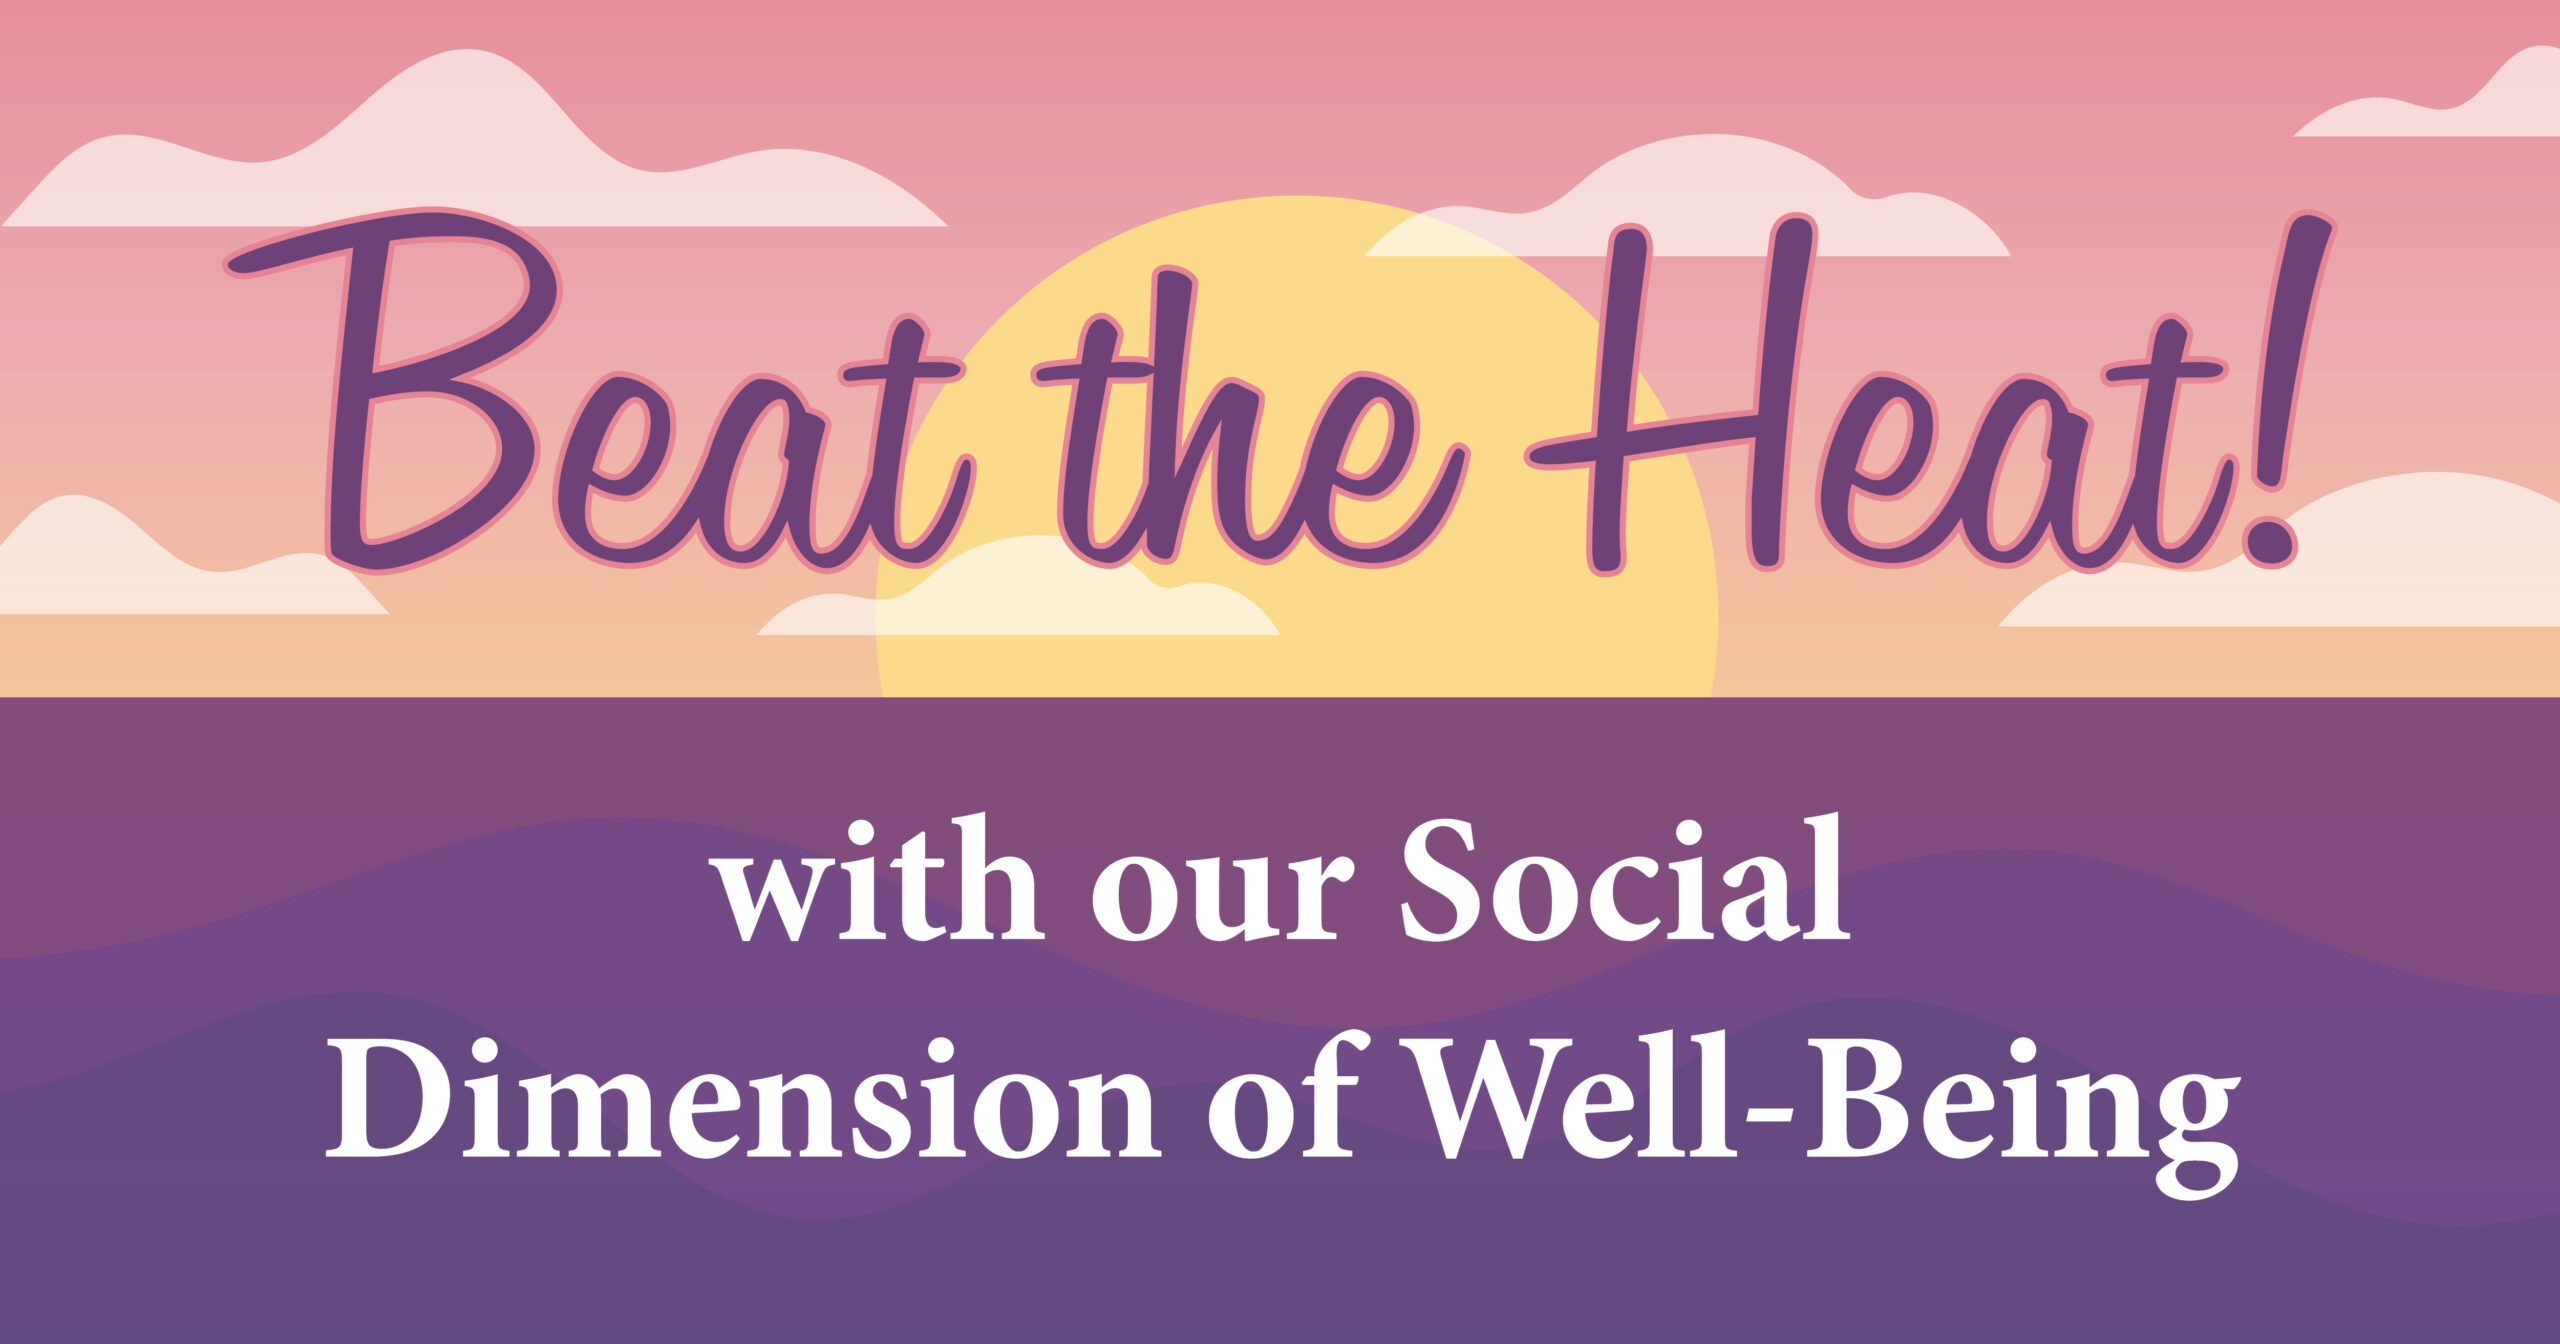 Beat The Heat With Our Social Dimension of Wellbeing